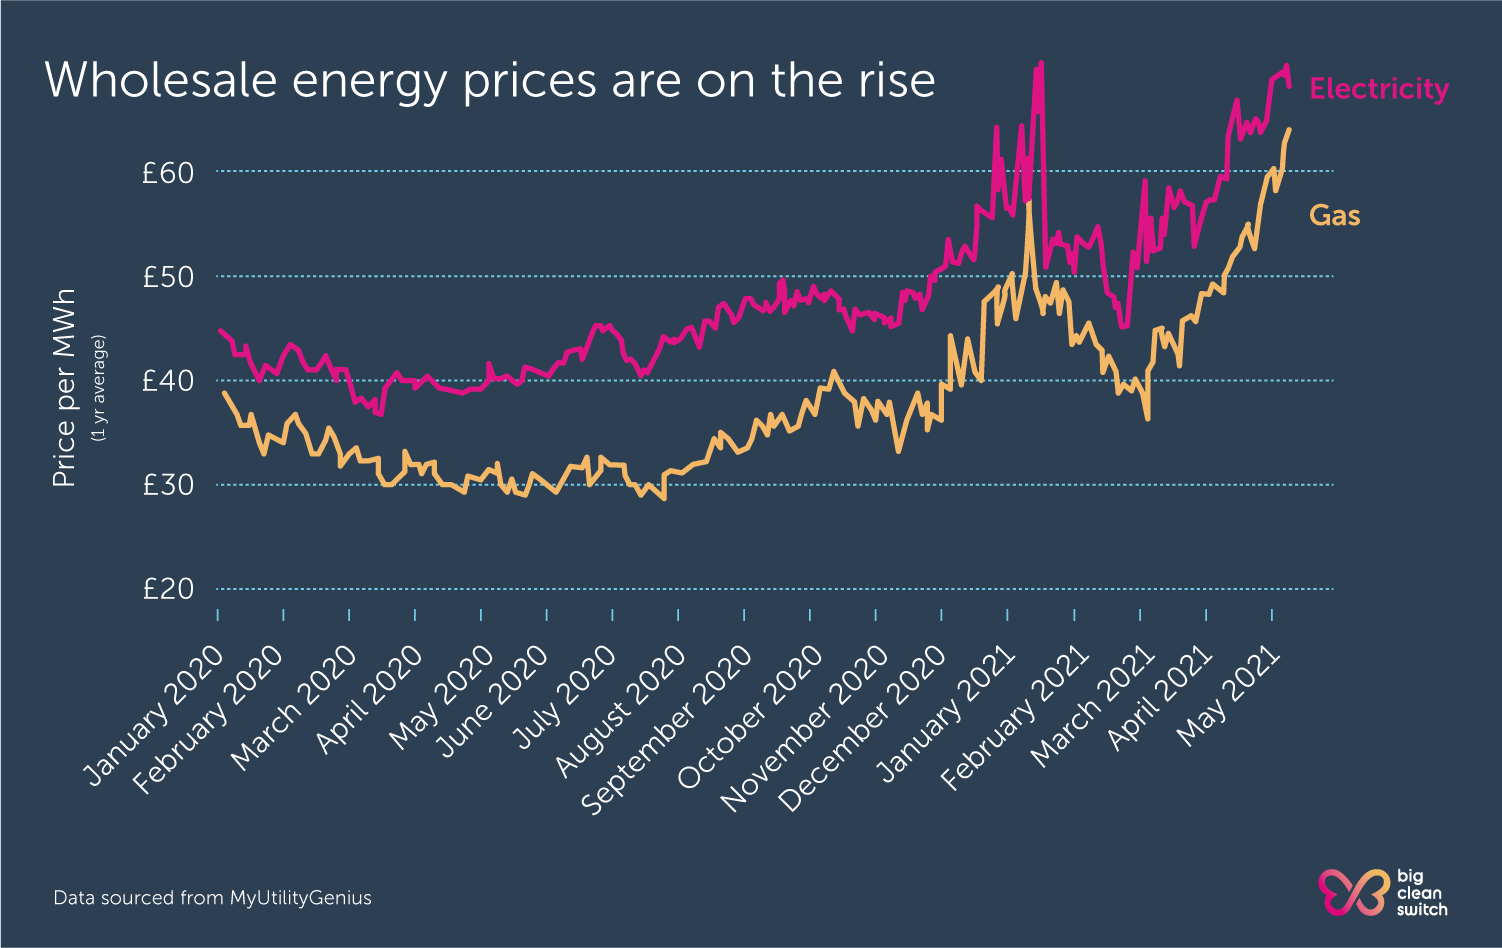 Wholesale energy prices result in increased electricity prices.